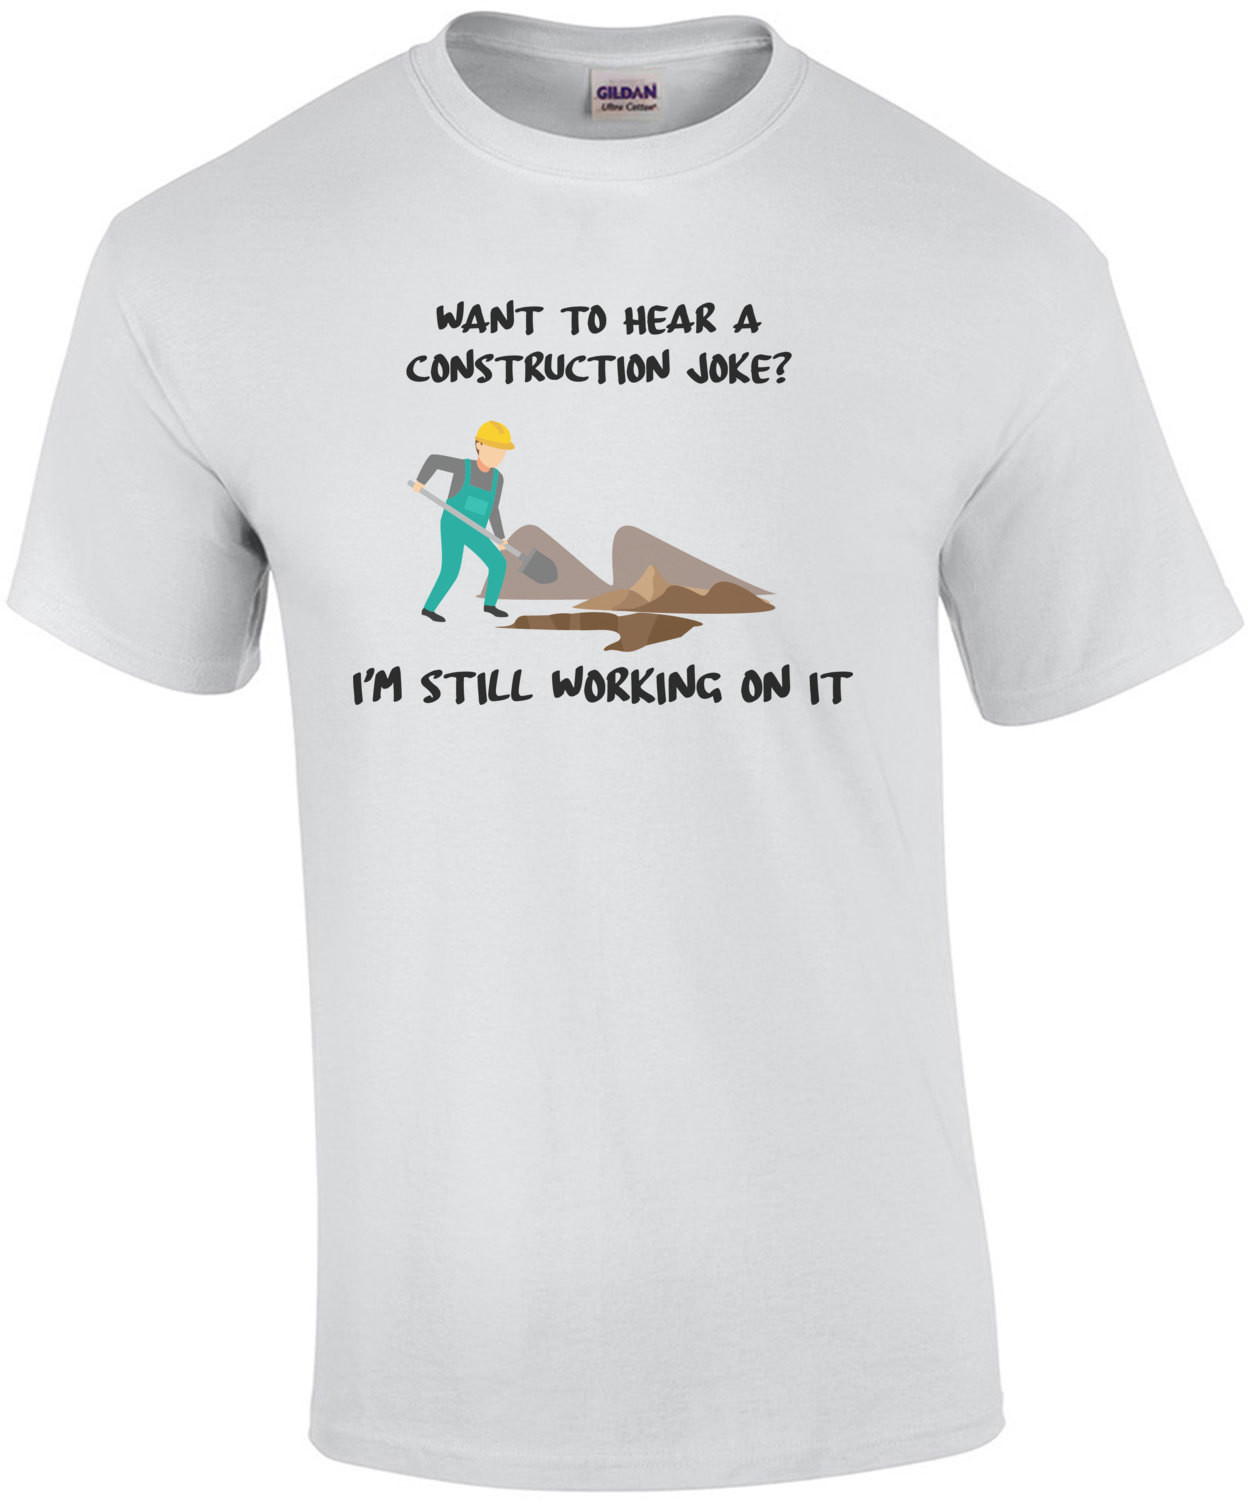 Want to hear a construction joke? I'm still working on it. Funny Construction T-Shirt